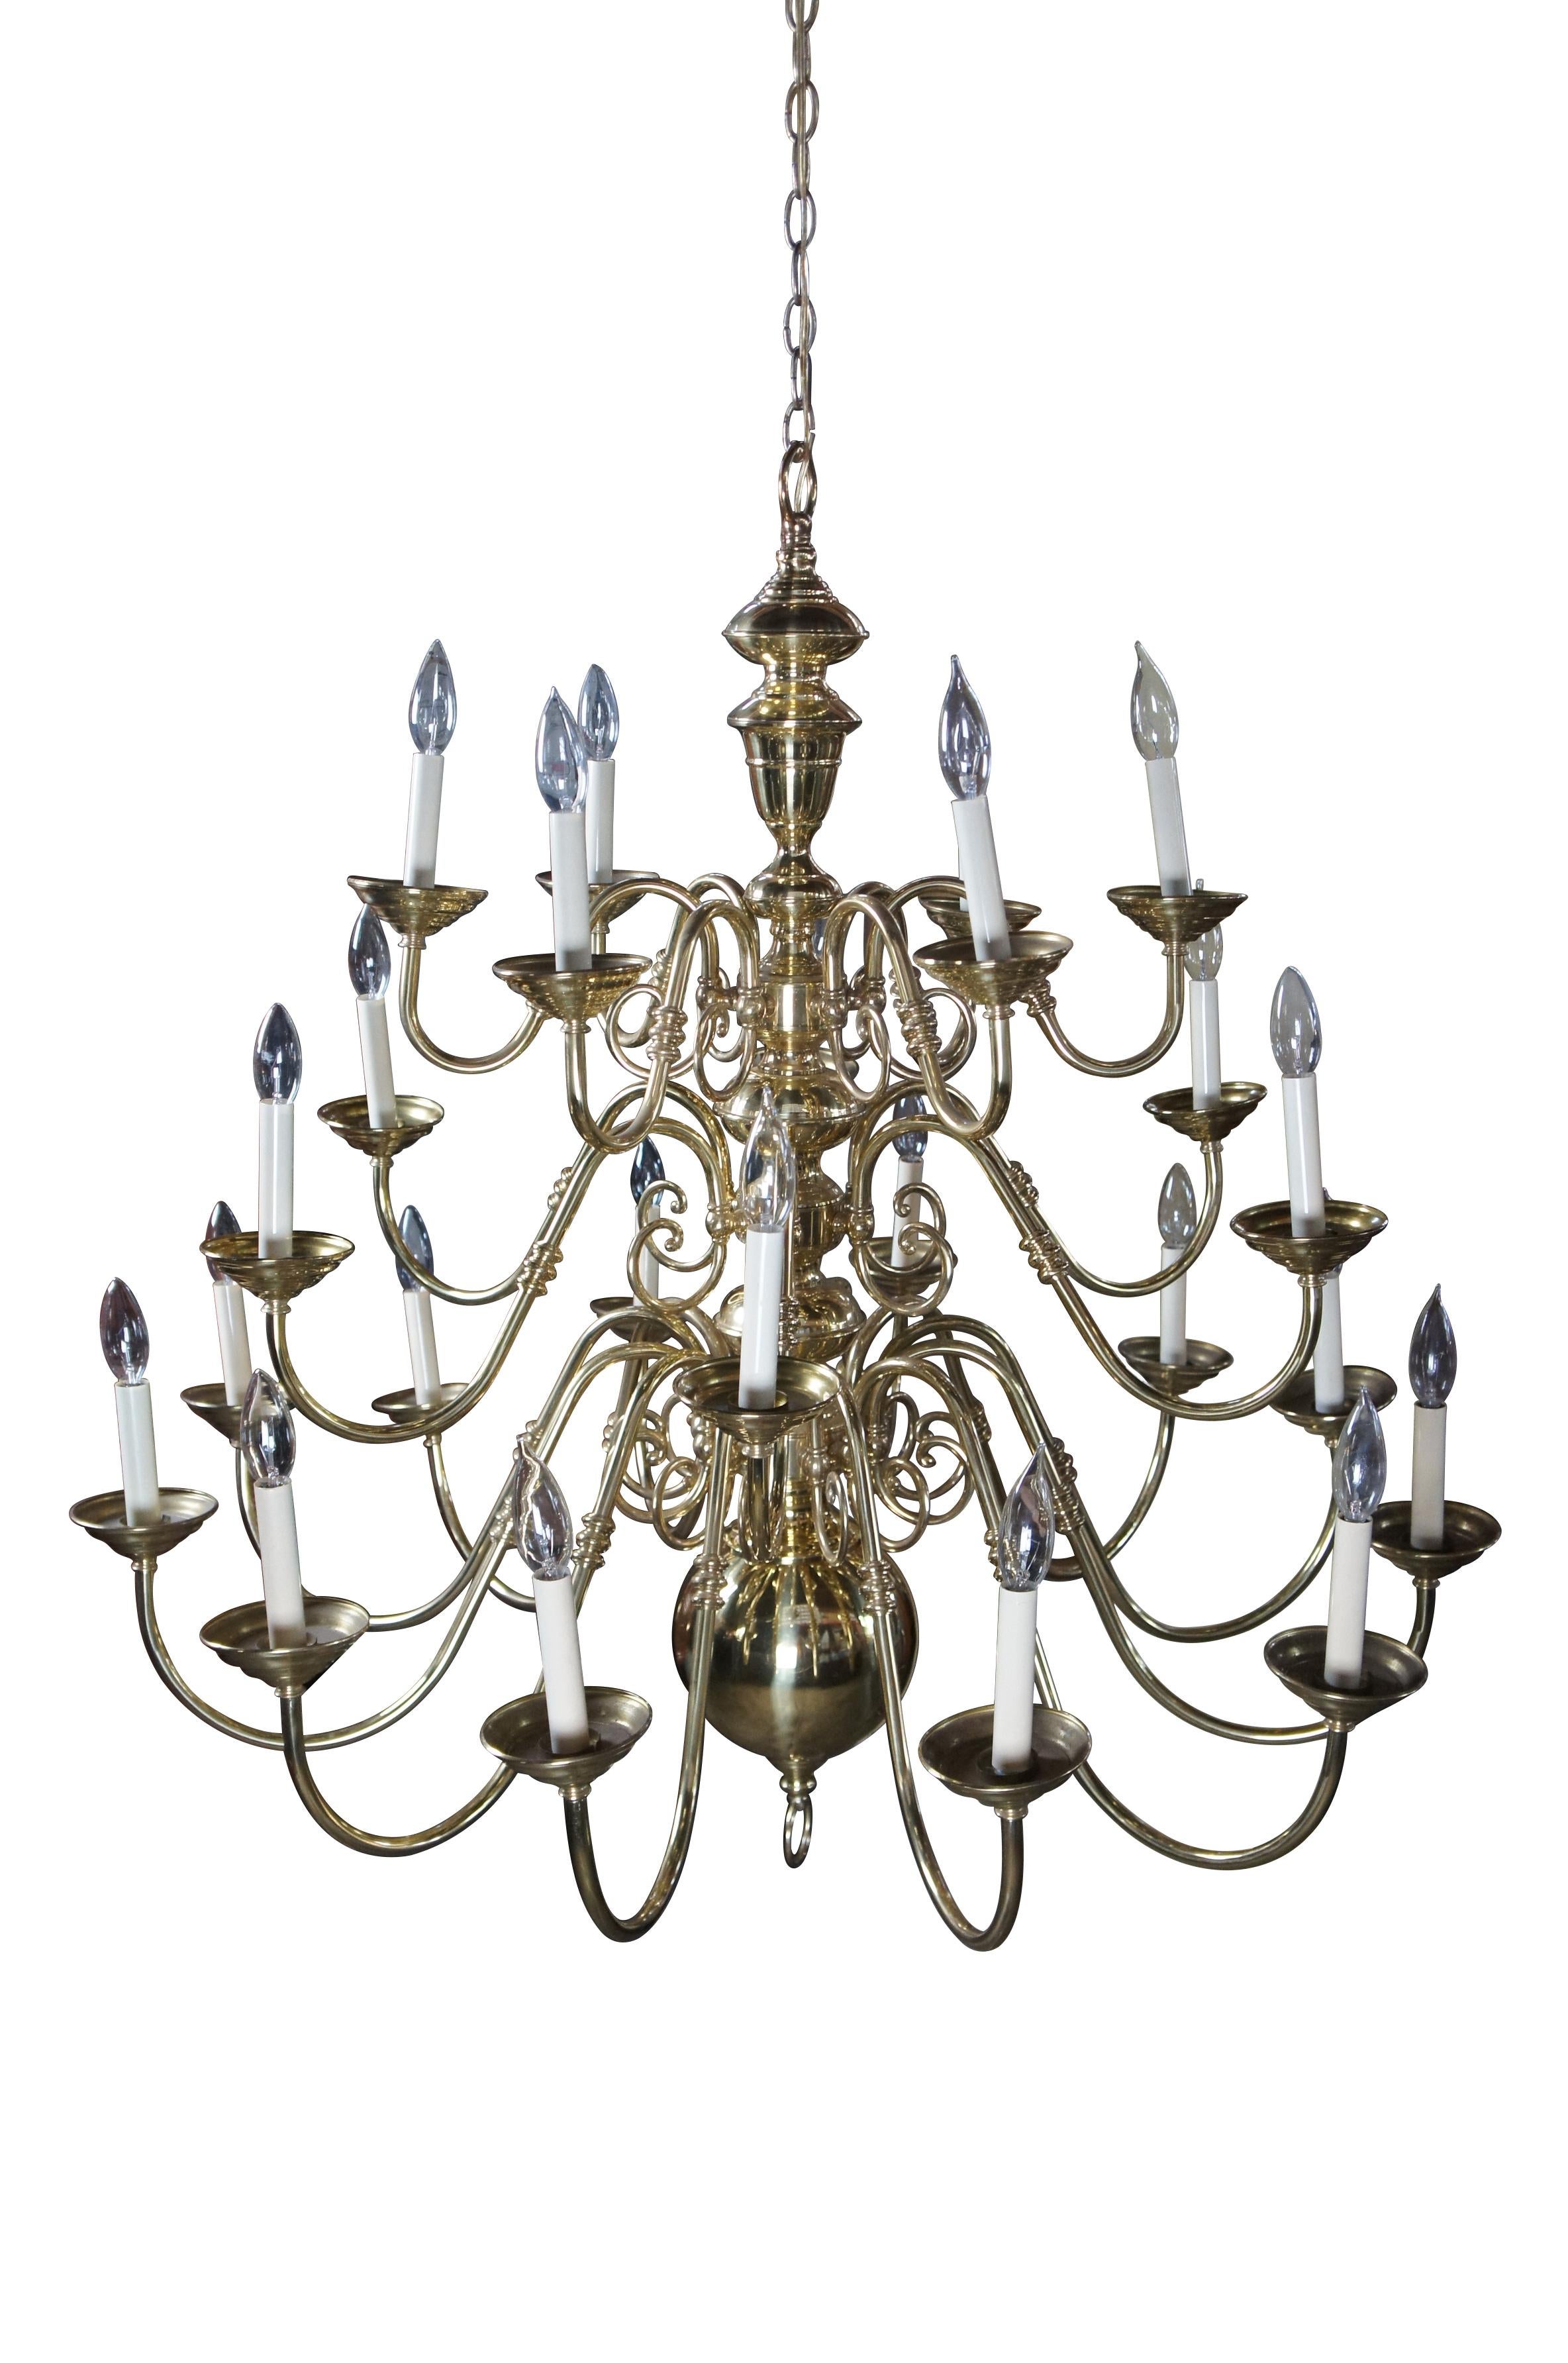 Vintage Williamsburg style chandelier featuring stacked orbs with ring drop finial and twenty four serpentine candlestick / candle lights set on three tiers. 

Dimensions:
40